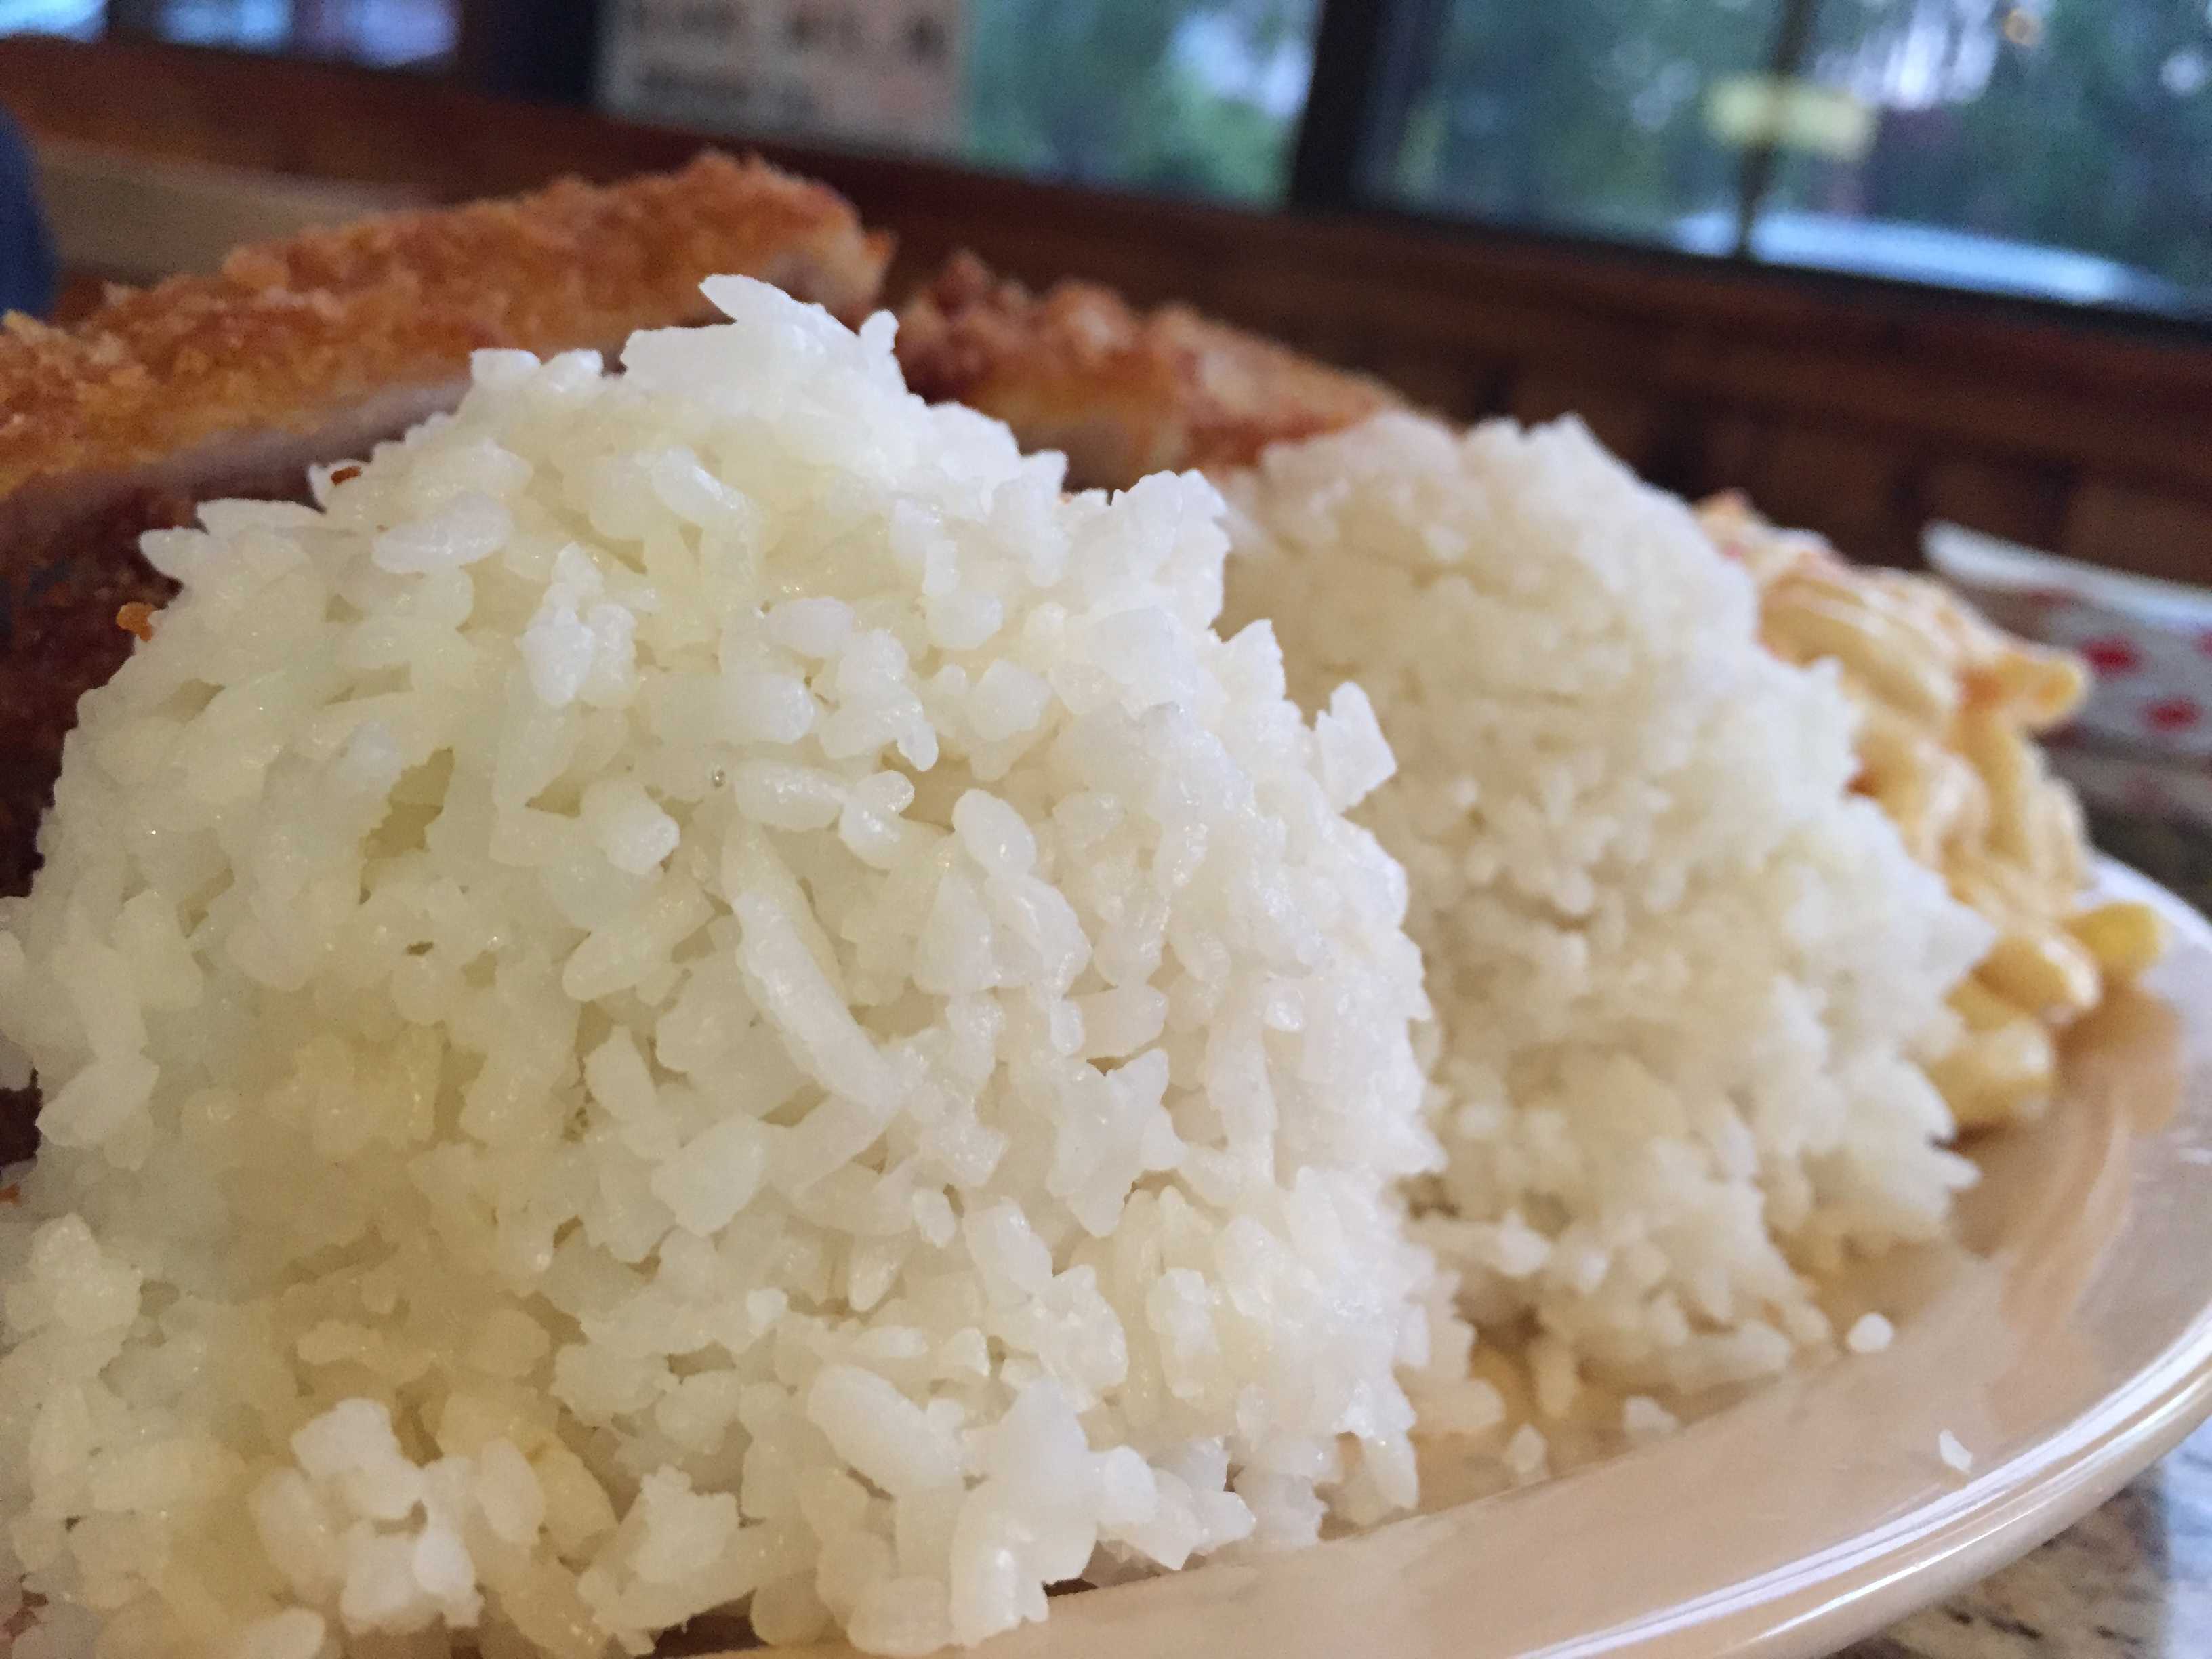 The chicken Katsu is served with generous portions of chicken and rice. Its price is quite low at $5.95. Photos by Caitlyn Tjong.